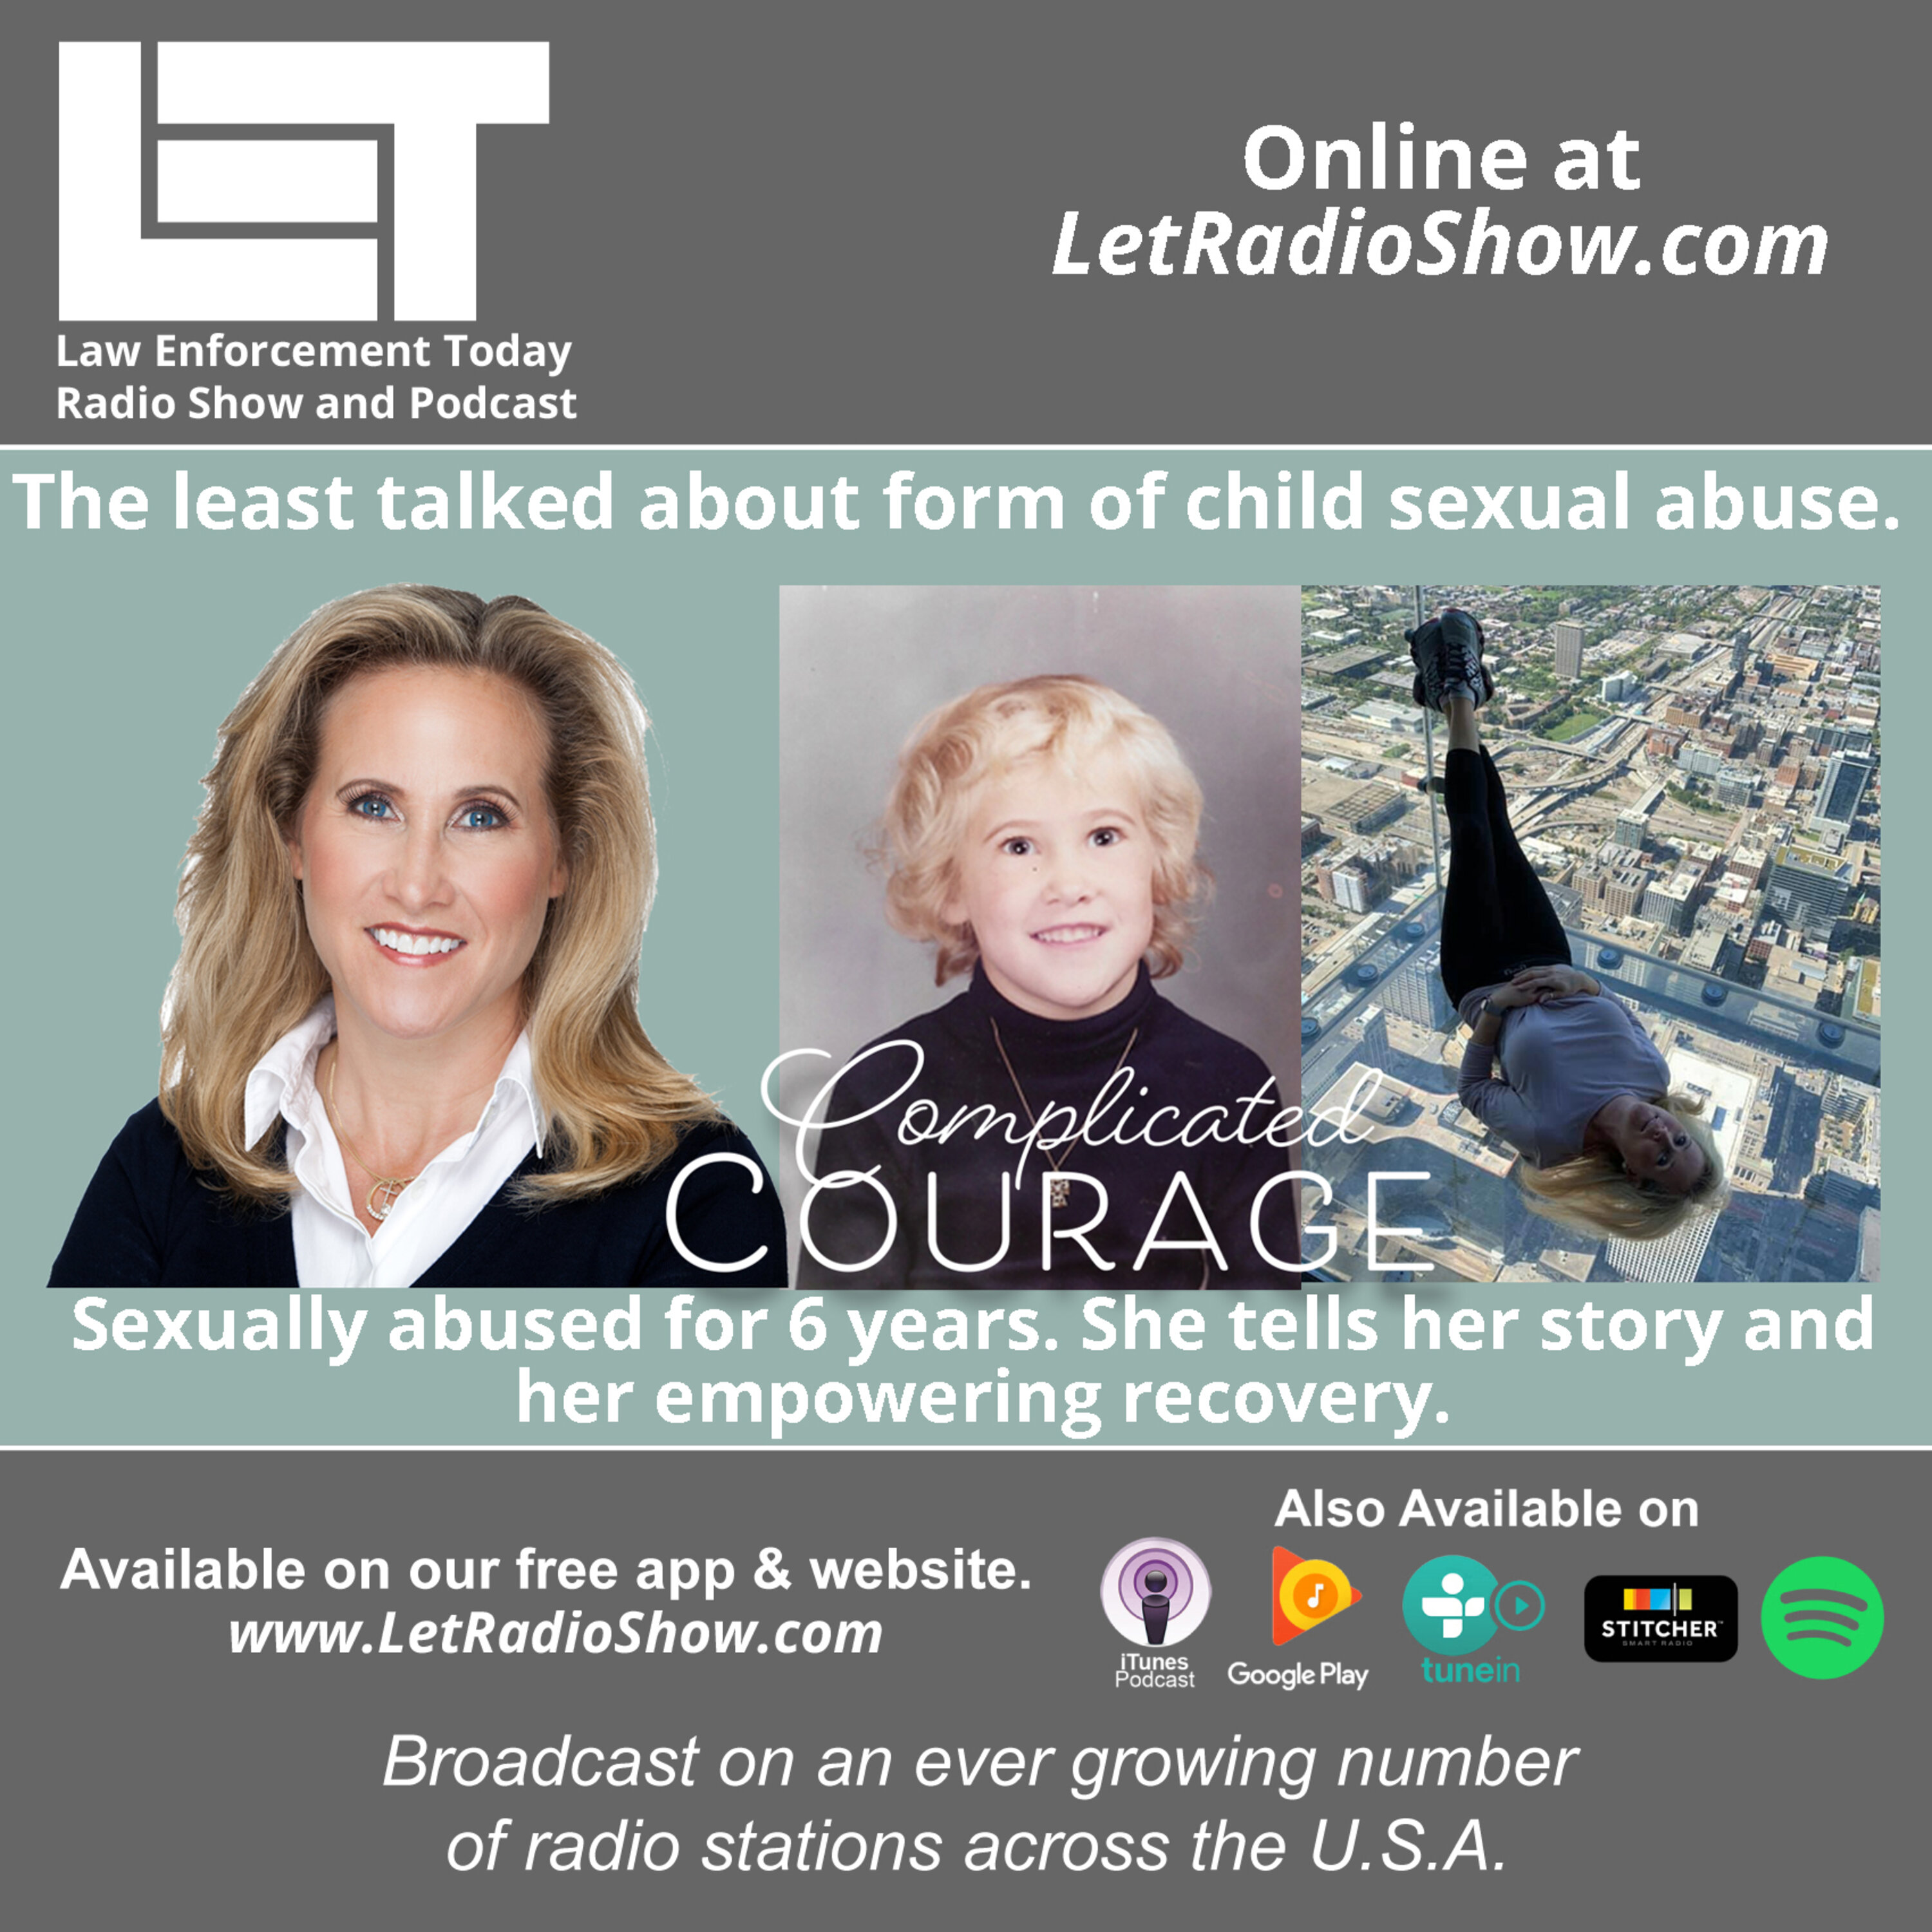 S5E59: The least talked about form of child sexual abuse. Sexually abused for 6 years. She tells her story and her empowering recovery.